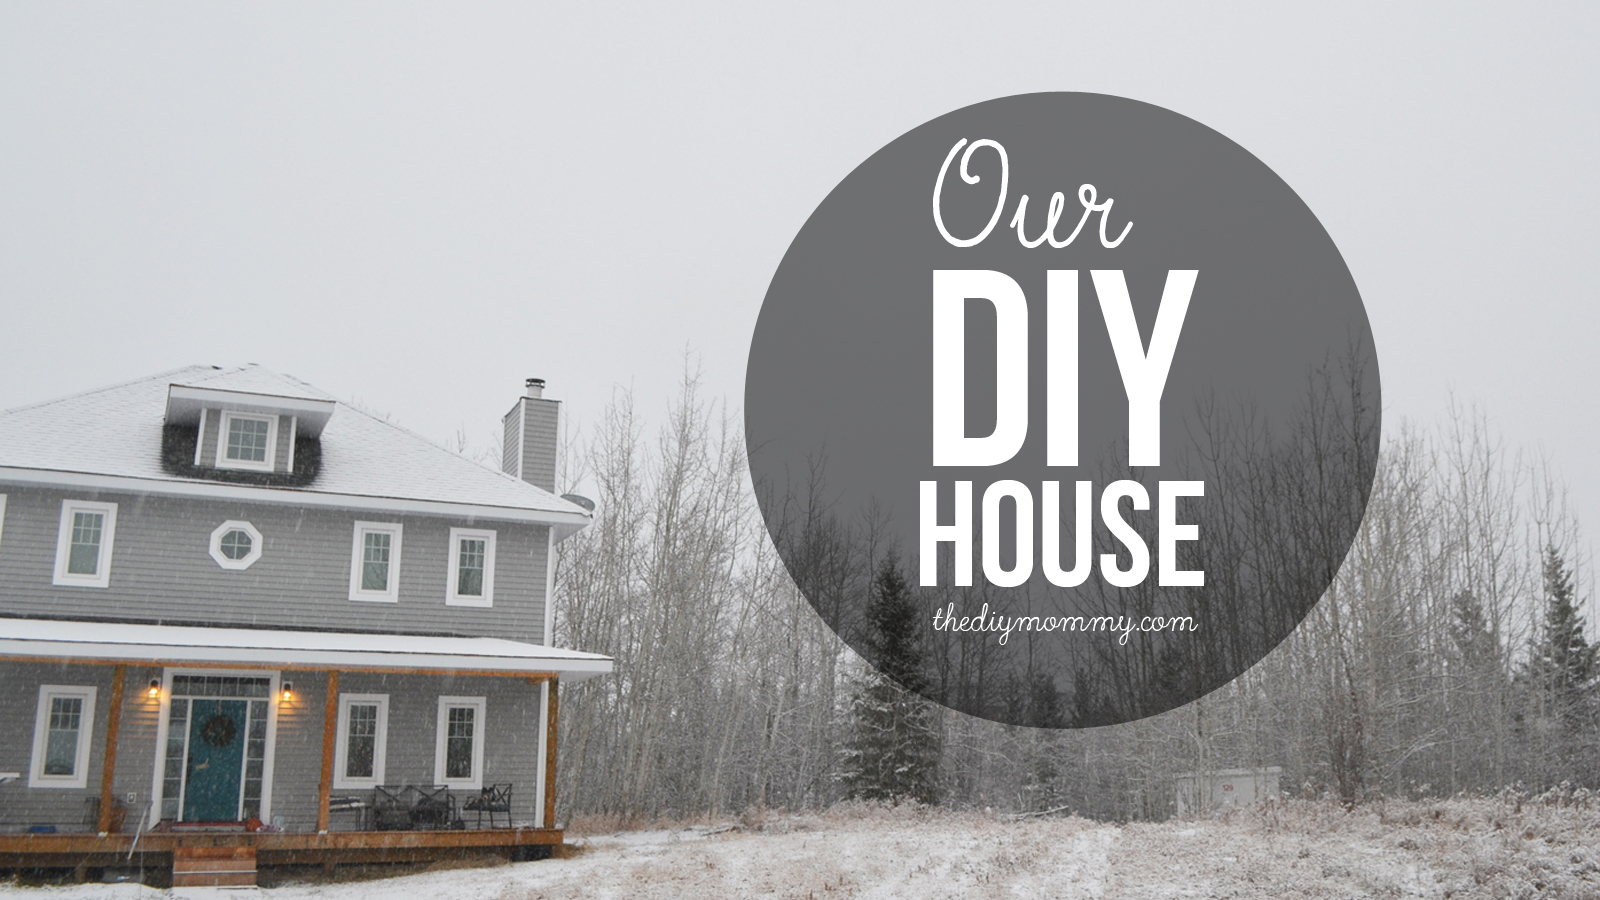 Our DIY House: How We Built A Home From Foundation to Finishing on Our Own (Video)